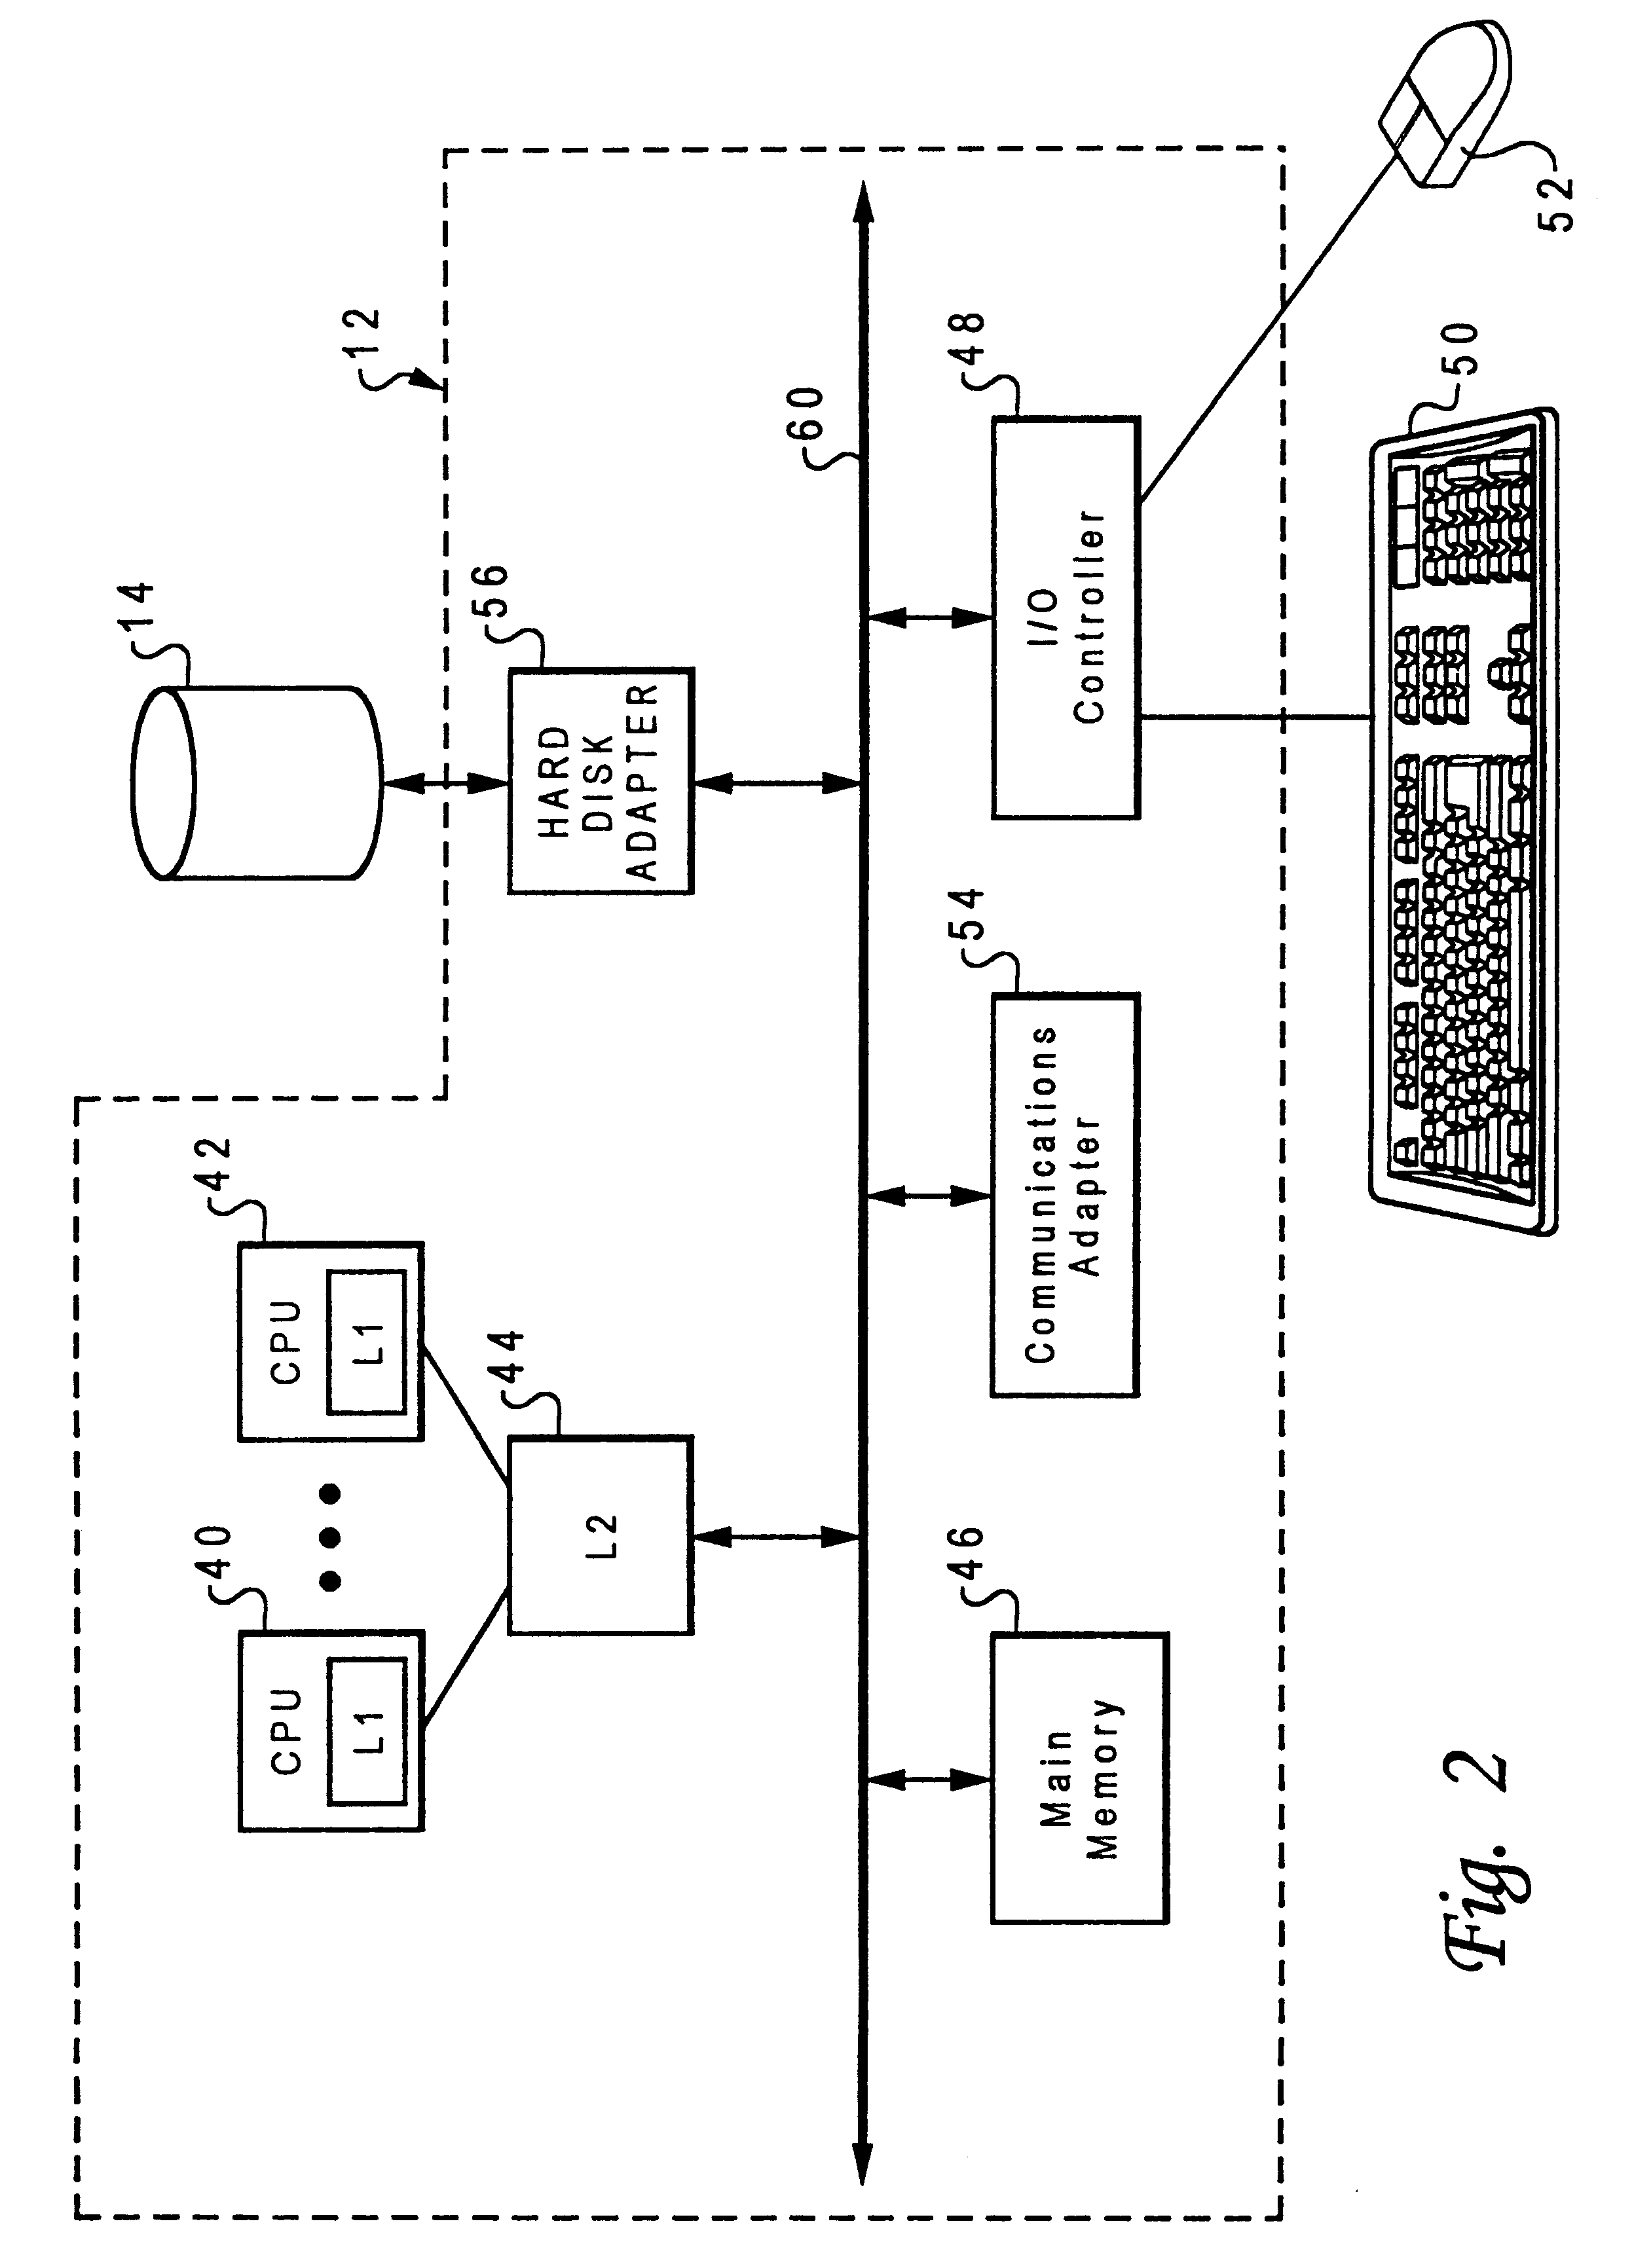 Method and system for data filtering within an object-oriented data processing system